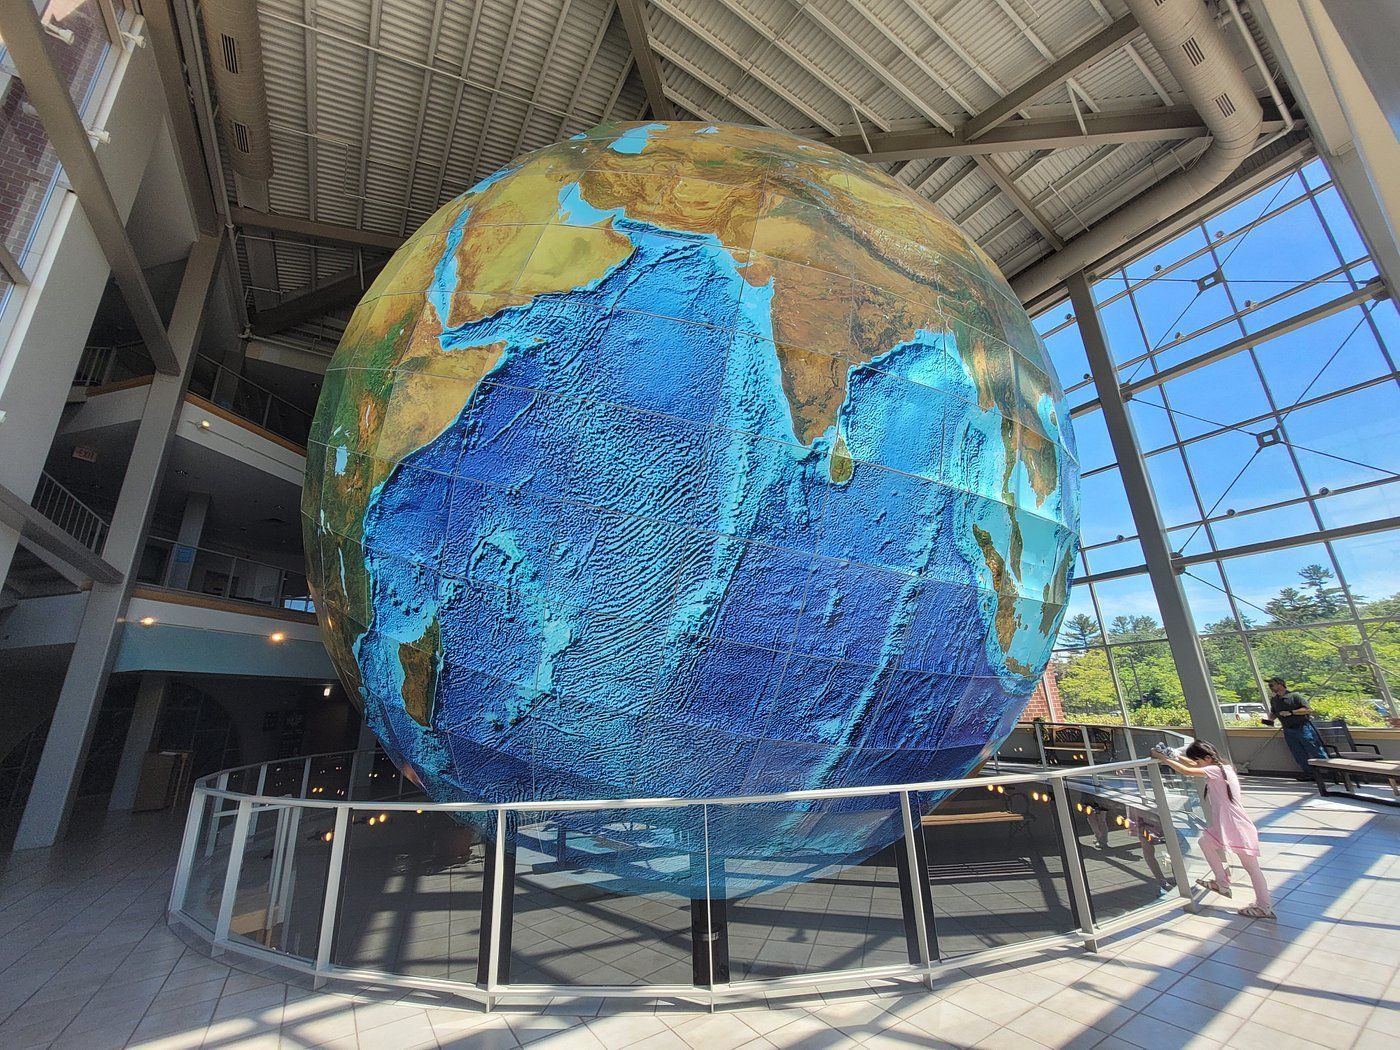 
World's Largest Rotating and Revolving Globe, world record in Yarmouth, Maine